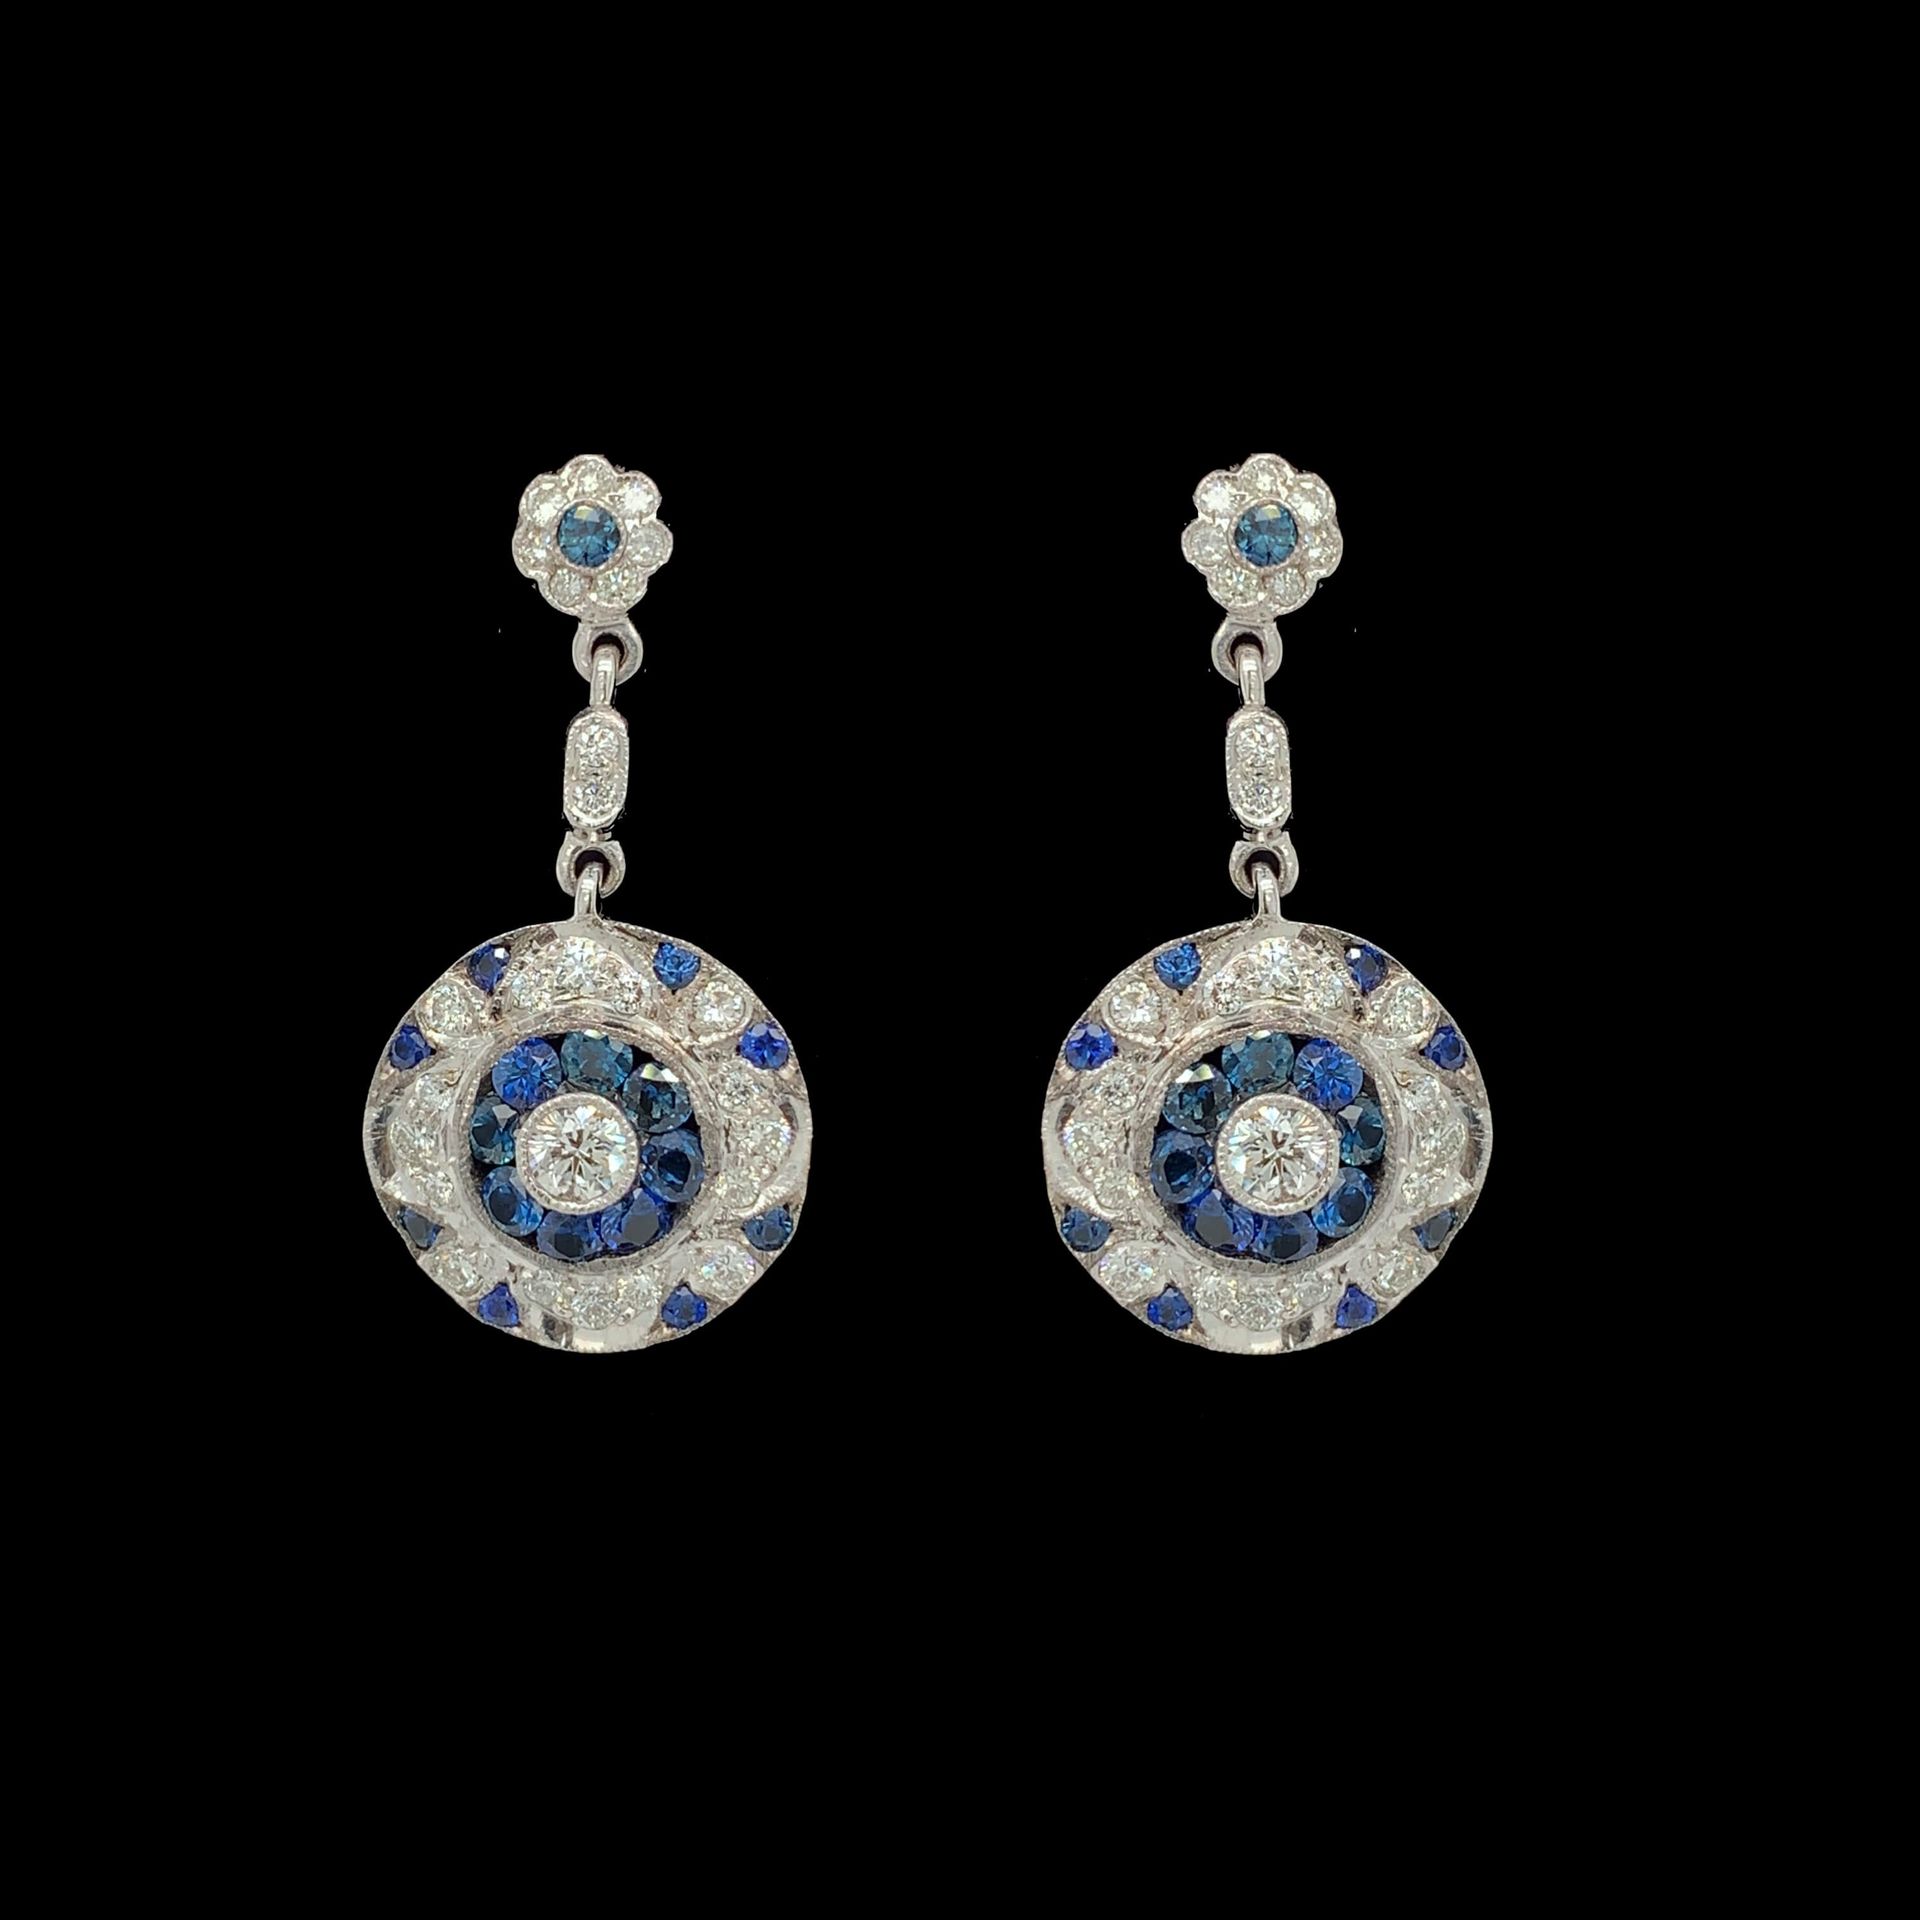 DIAFINI Pair of EARRINGS in white gold (750 thousandths) holding a circular moti&hellip;